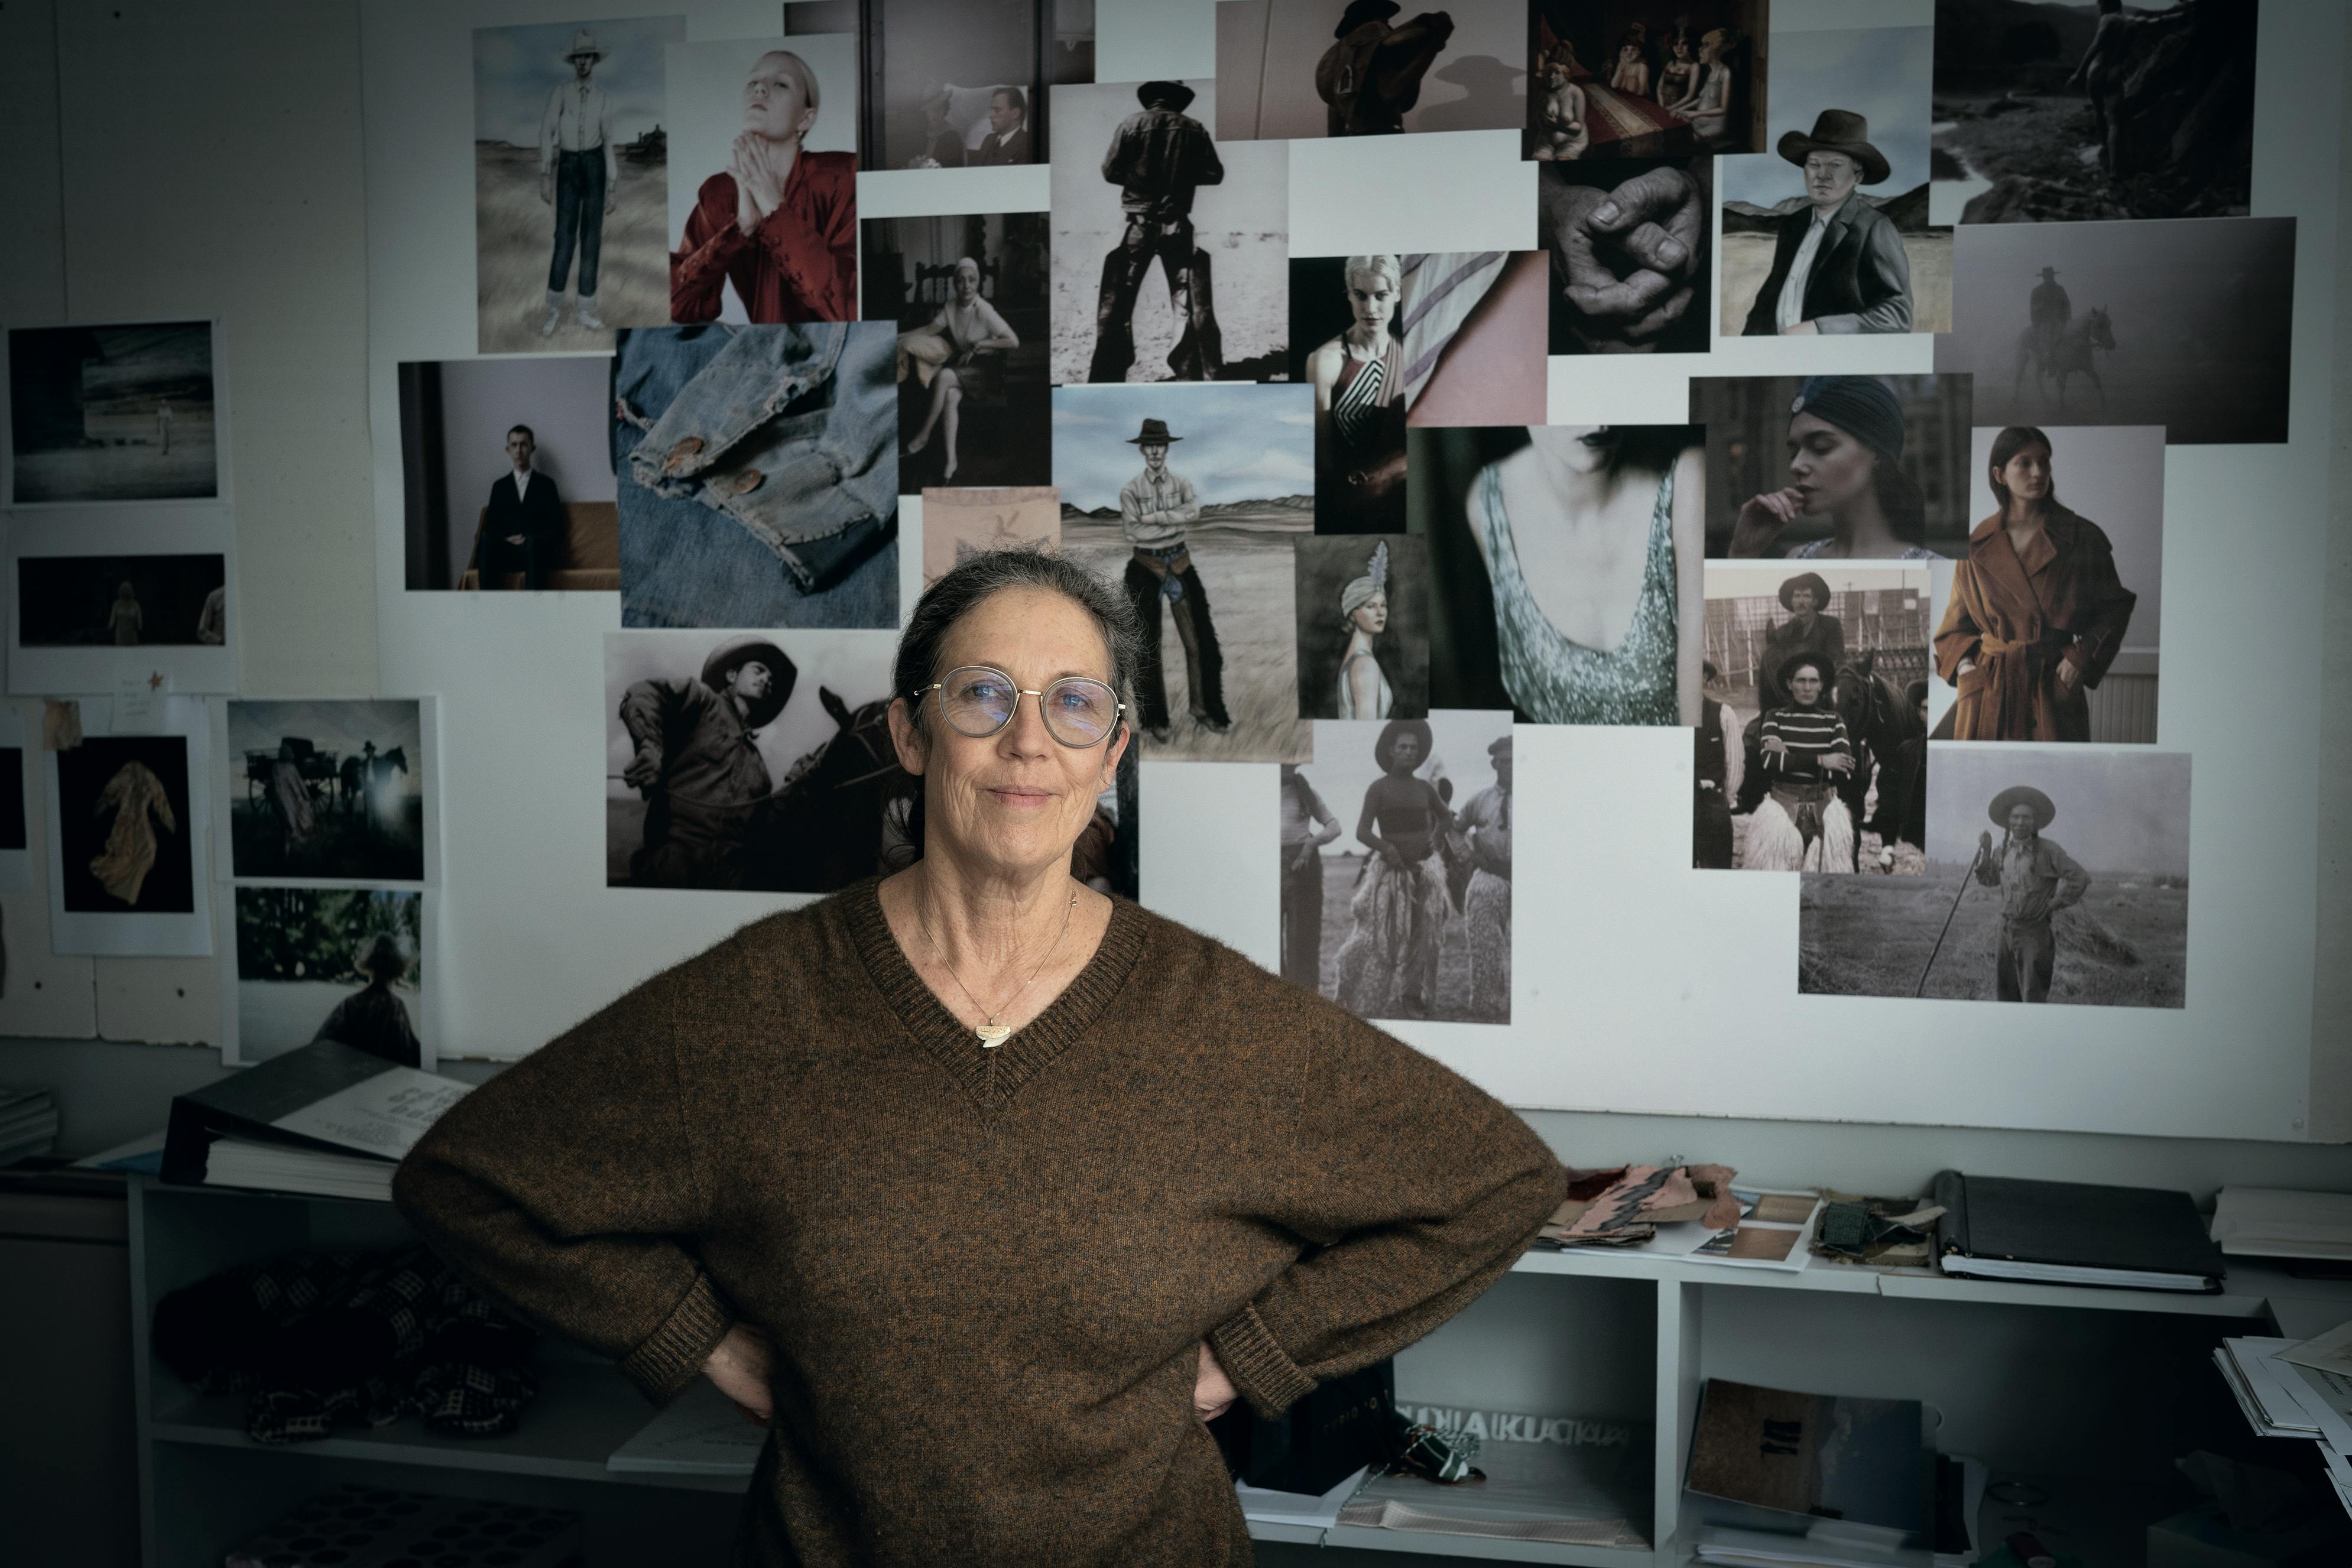 Kirsty Cameron wears a brown sweater and stands in front of a wall plastered with photos.